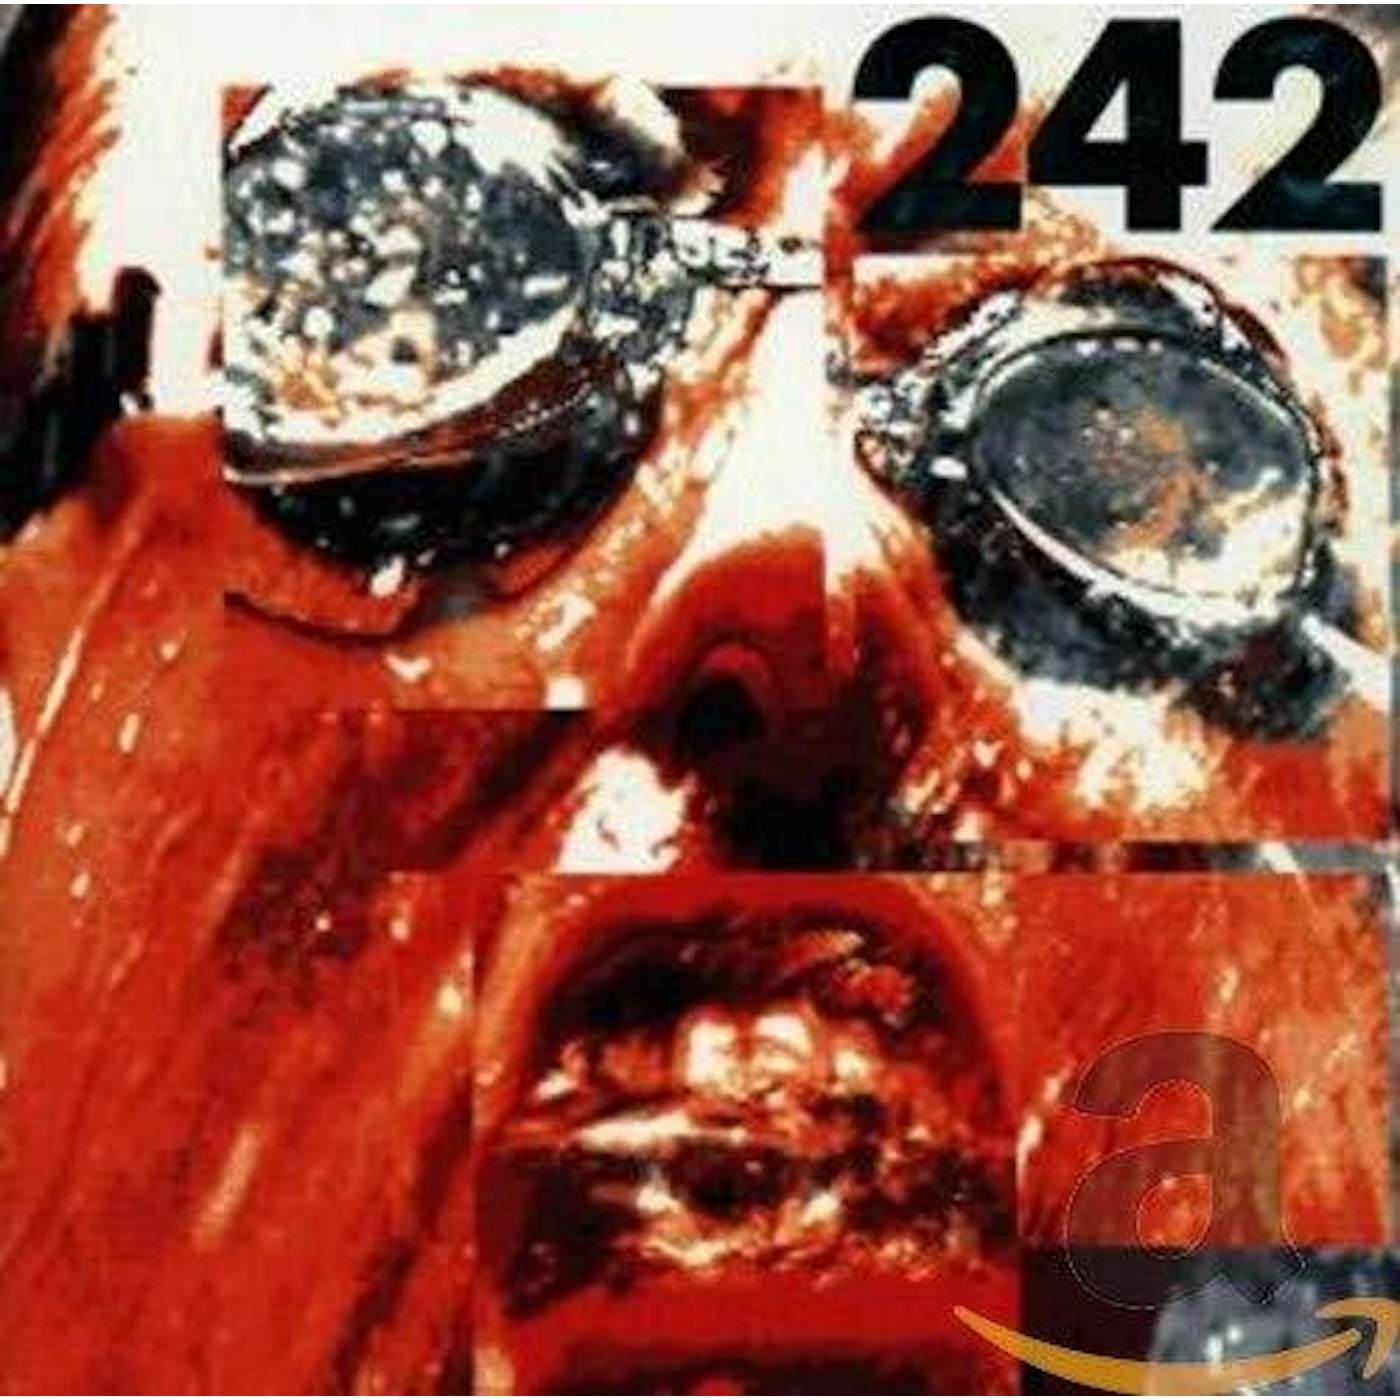 Front 242 TYRANNY (FOR YOU) Vinyl Record